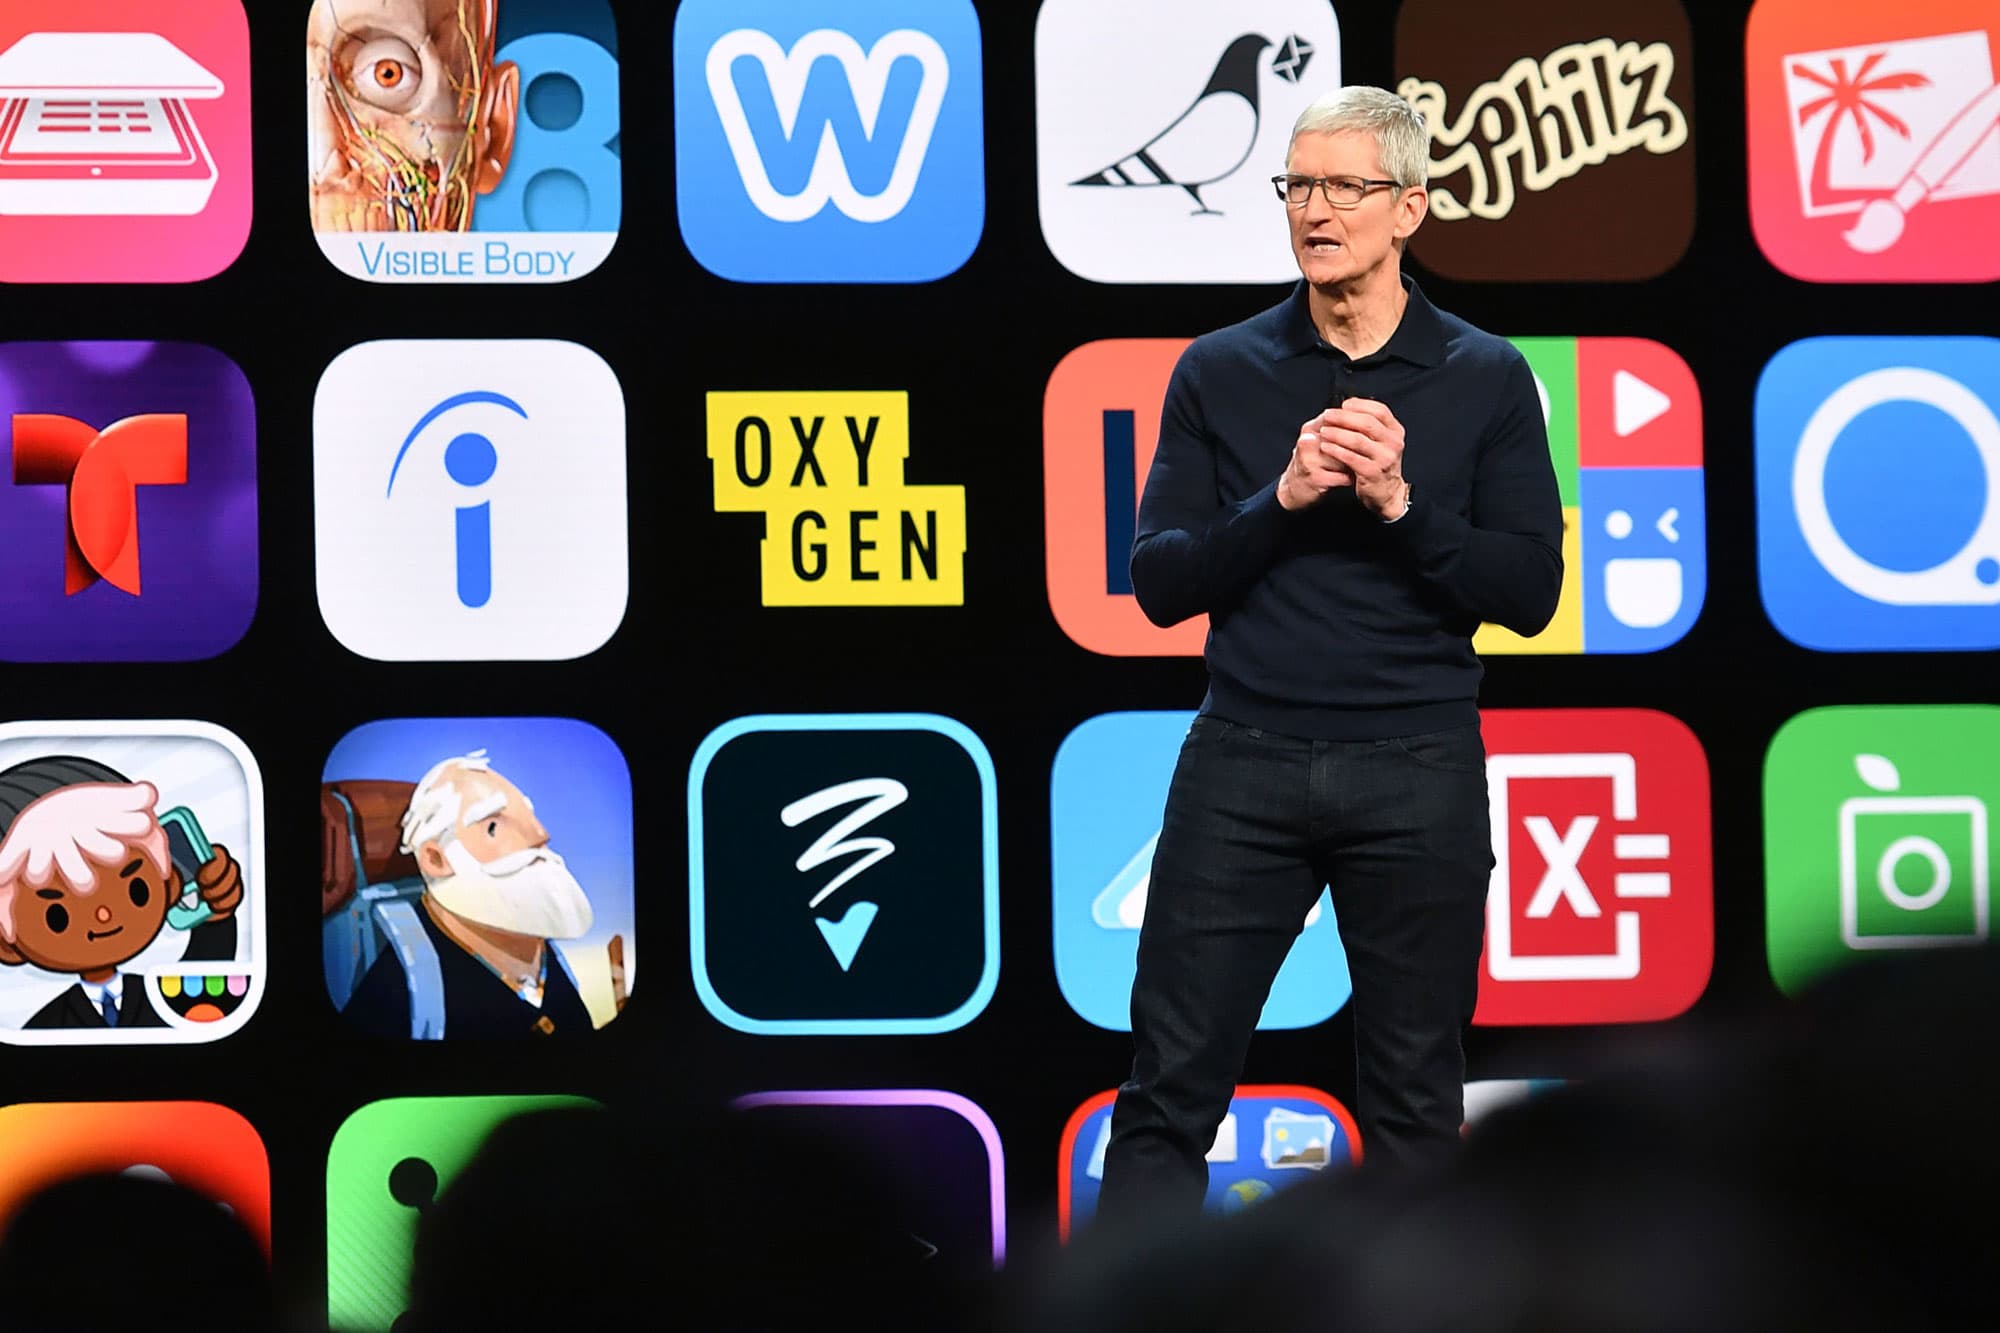 Apple implies it generated record revenue from App Store during 2021